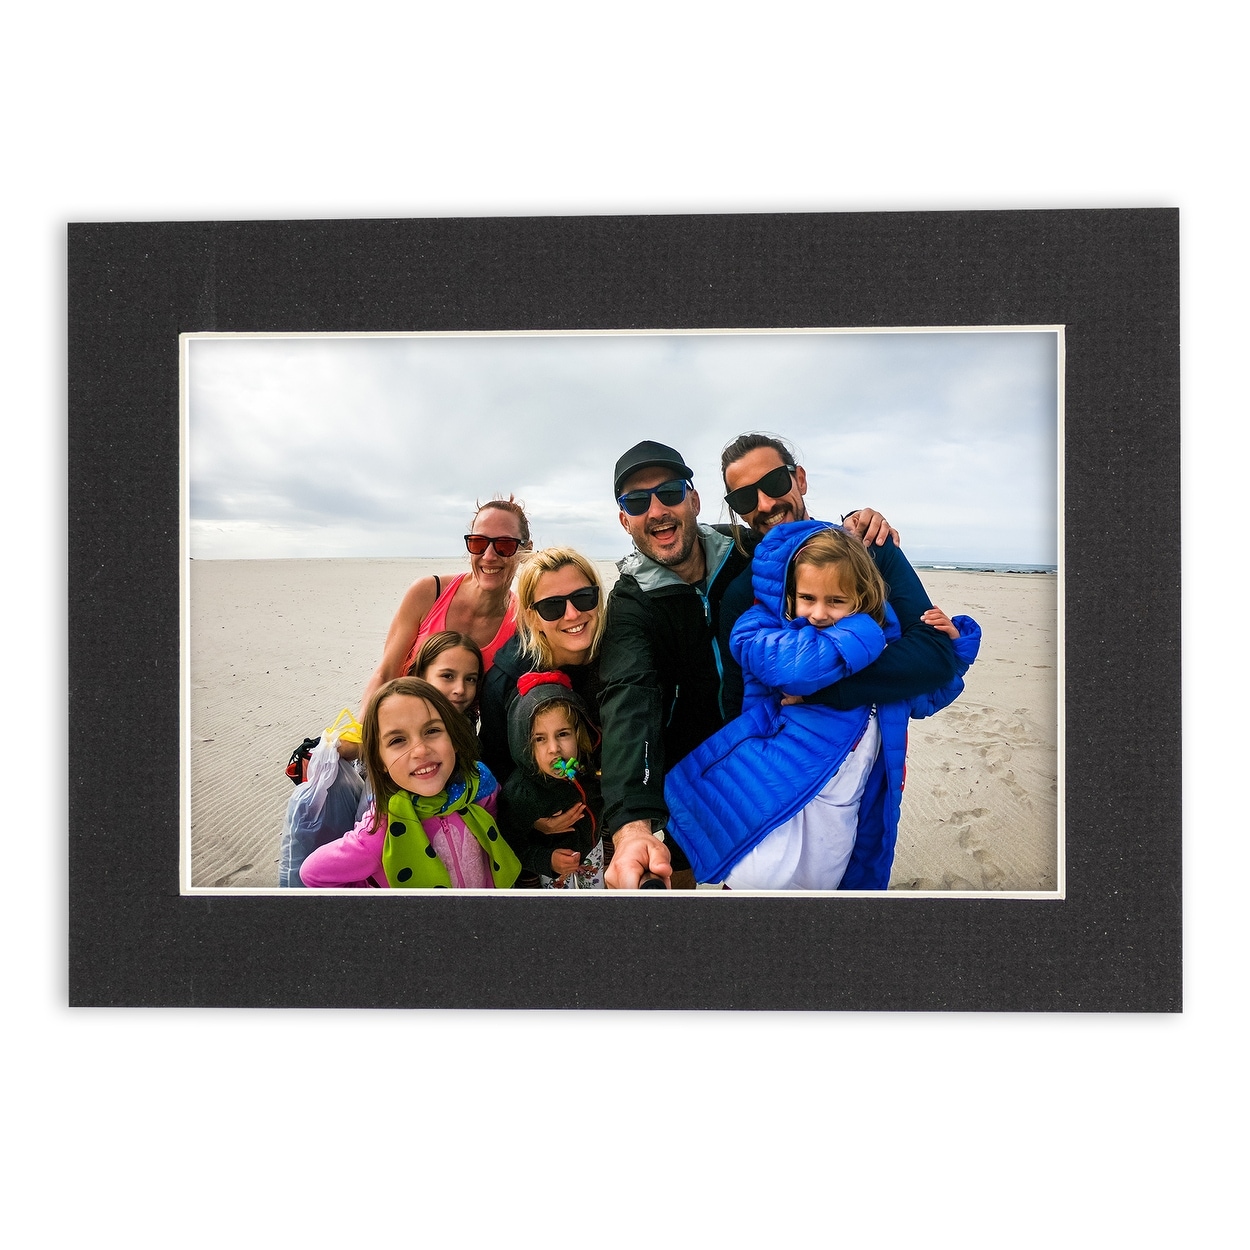 8.5x11 Mat for 5.5x8.5 Photo - Precut Textured Cream Picture Matboard for  Frames 8.5 x 11 Inches - Bevel Cut to Display Art 5.5 x 8.5 - Acid Free  Pack